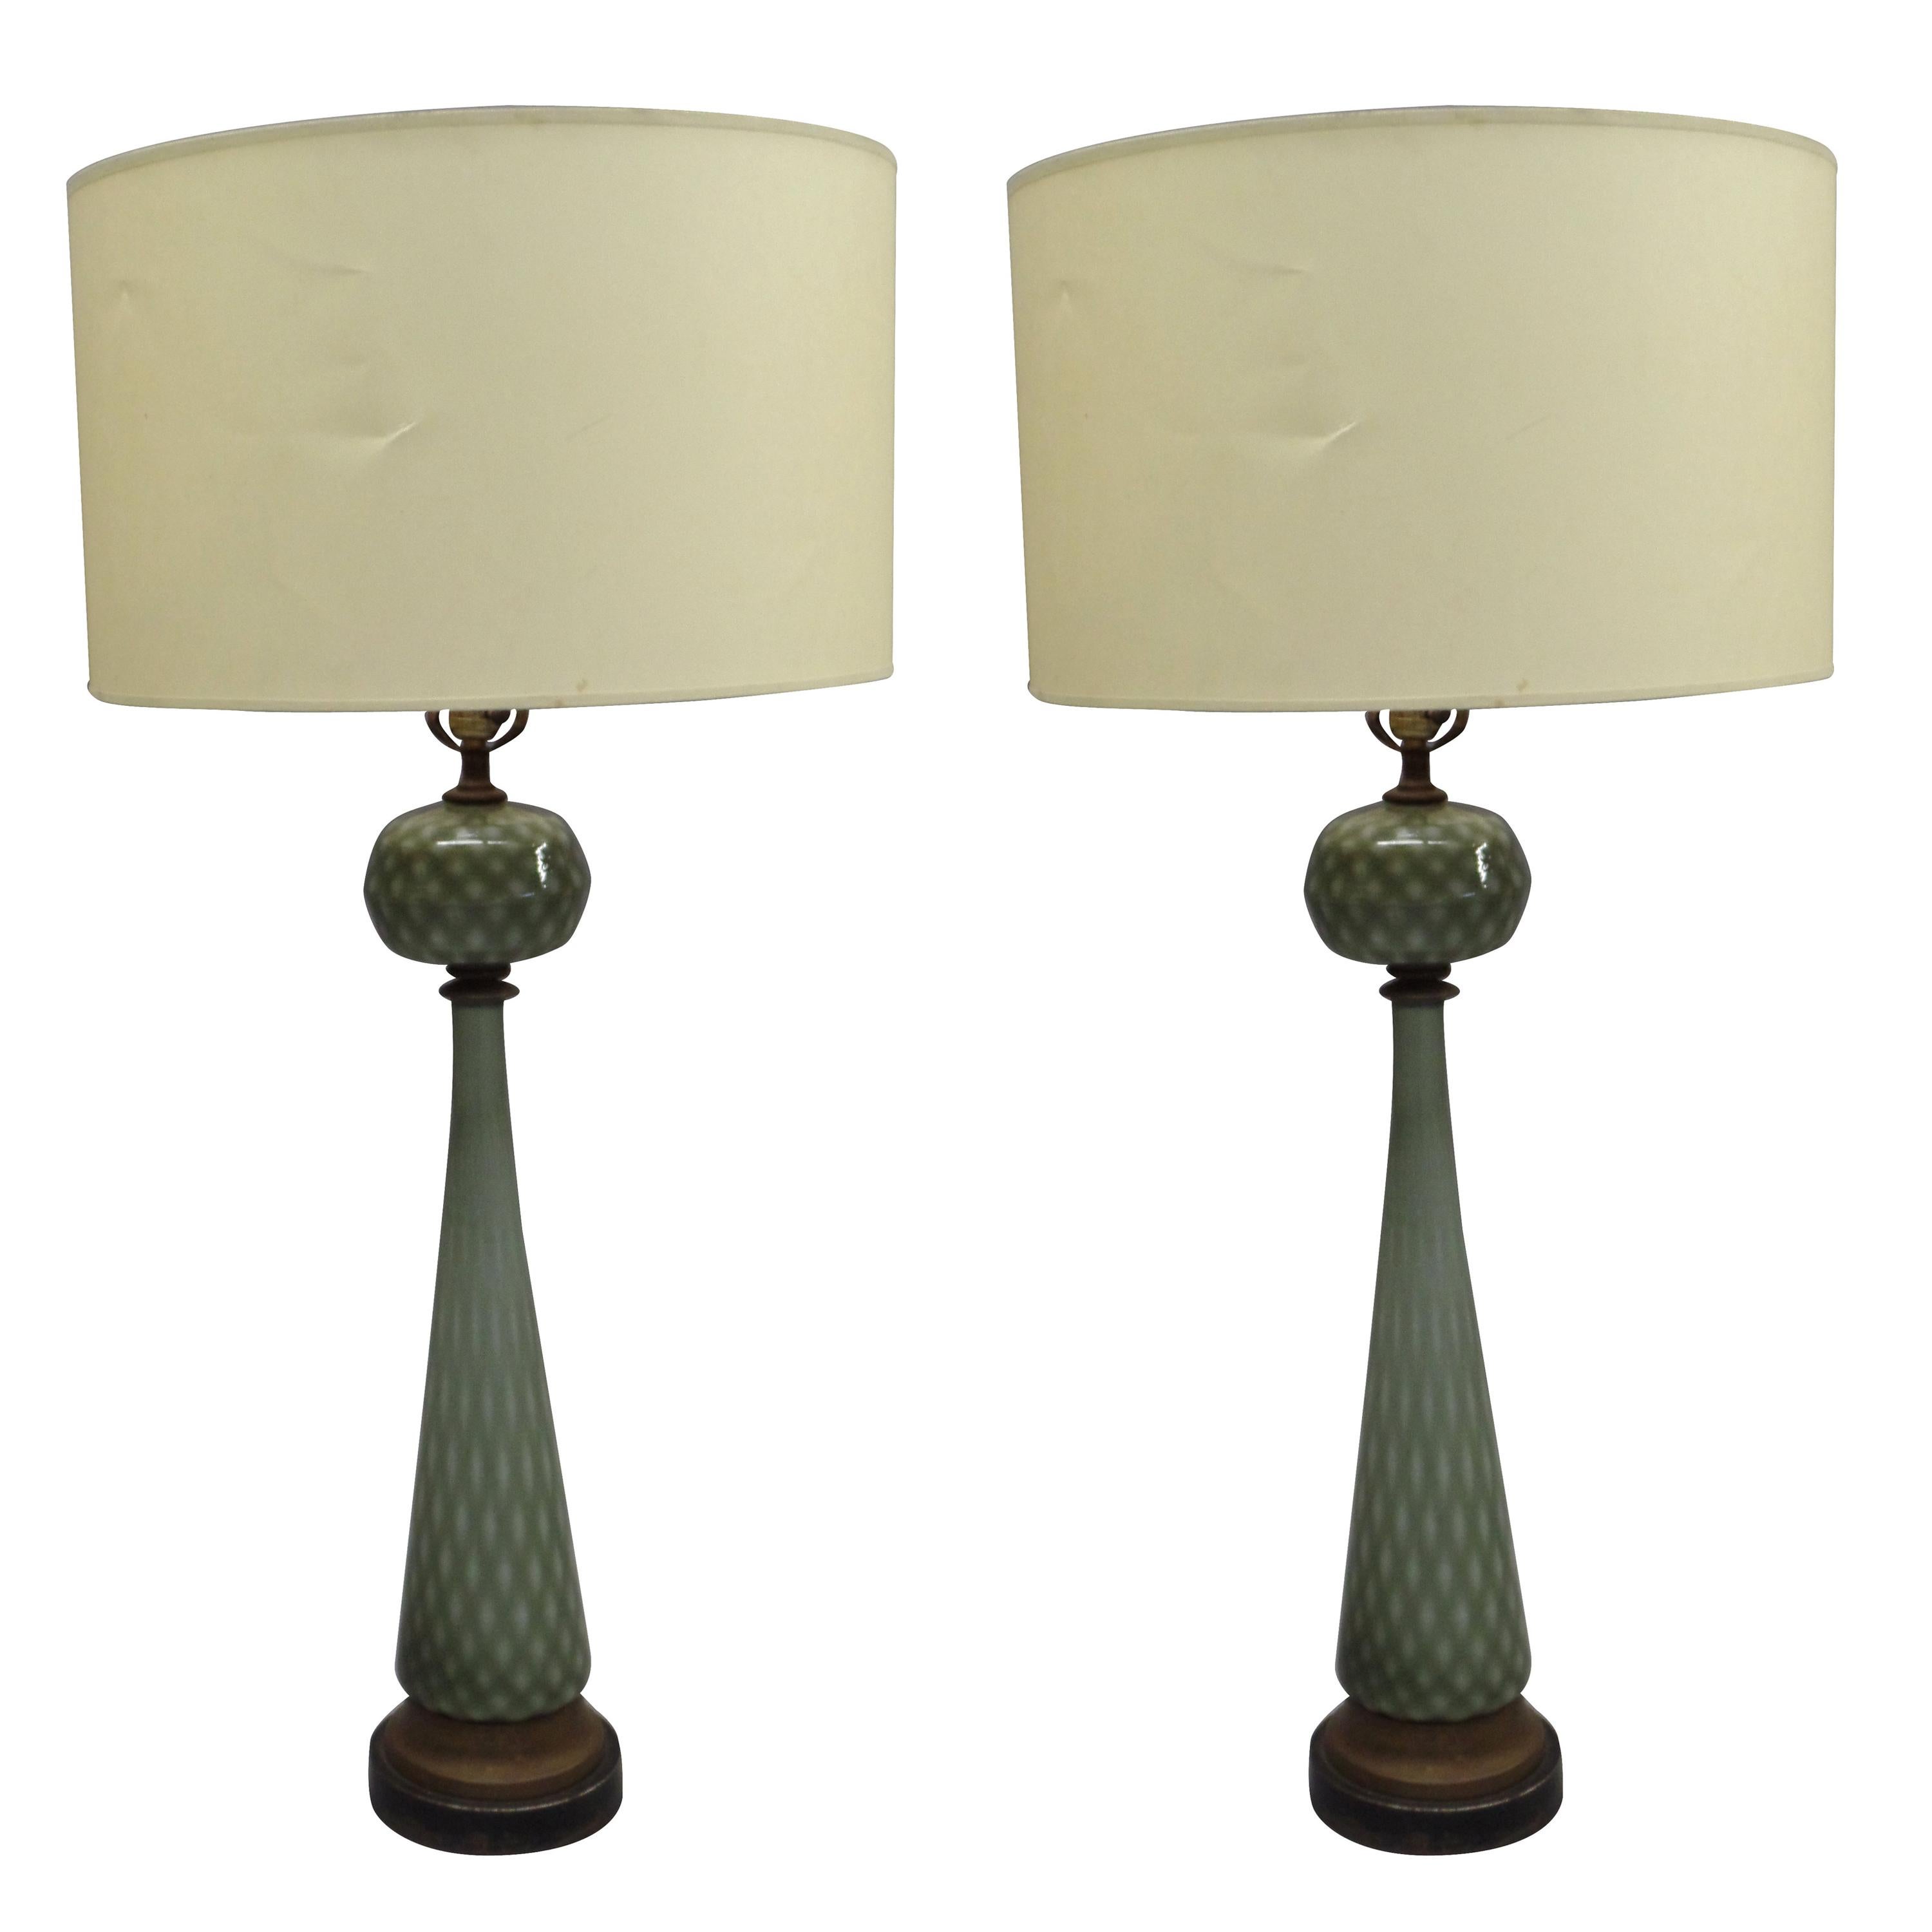 Pair of Large Mid-Century Modern Neoclassical Murano/Venetian Glass Table Lamps For Sale